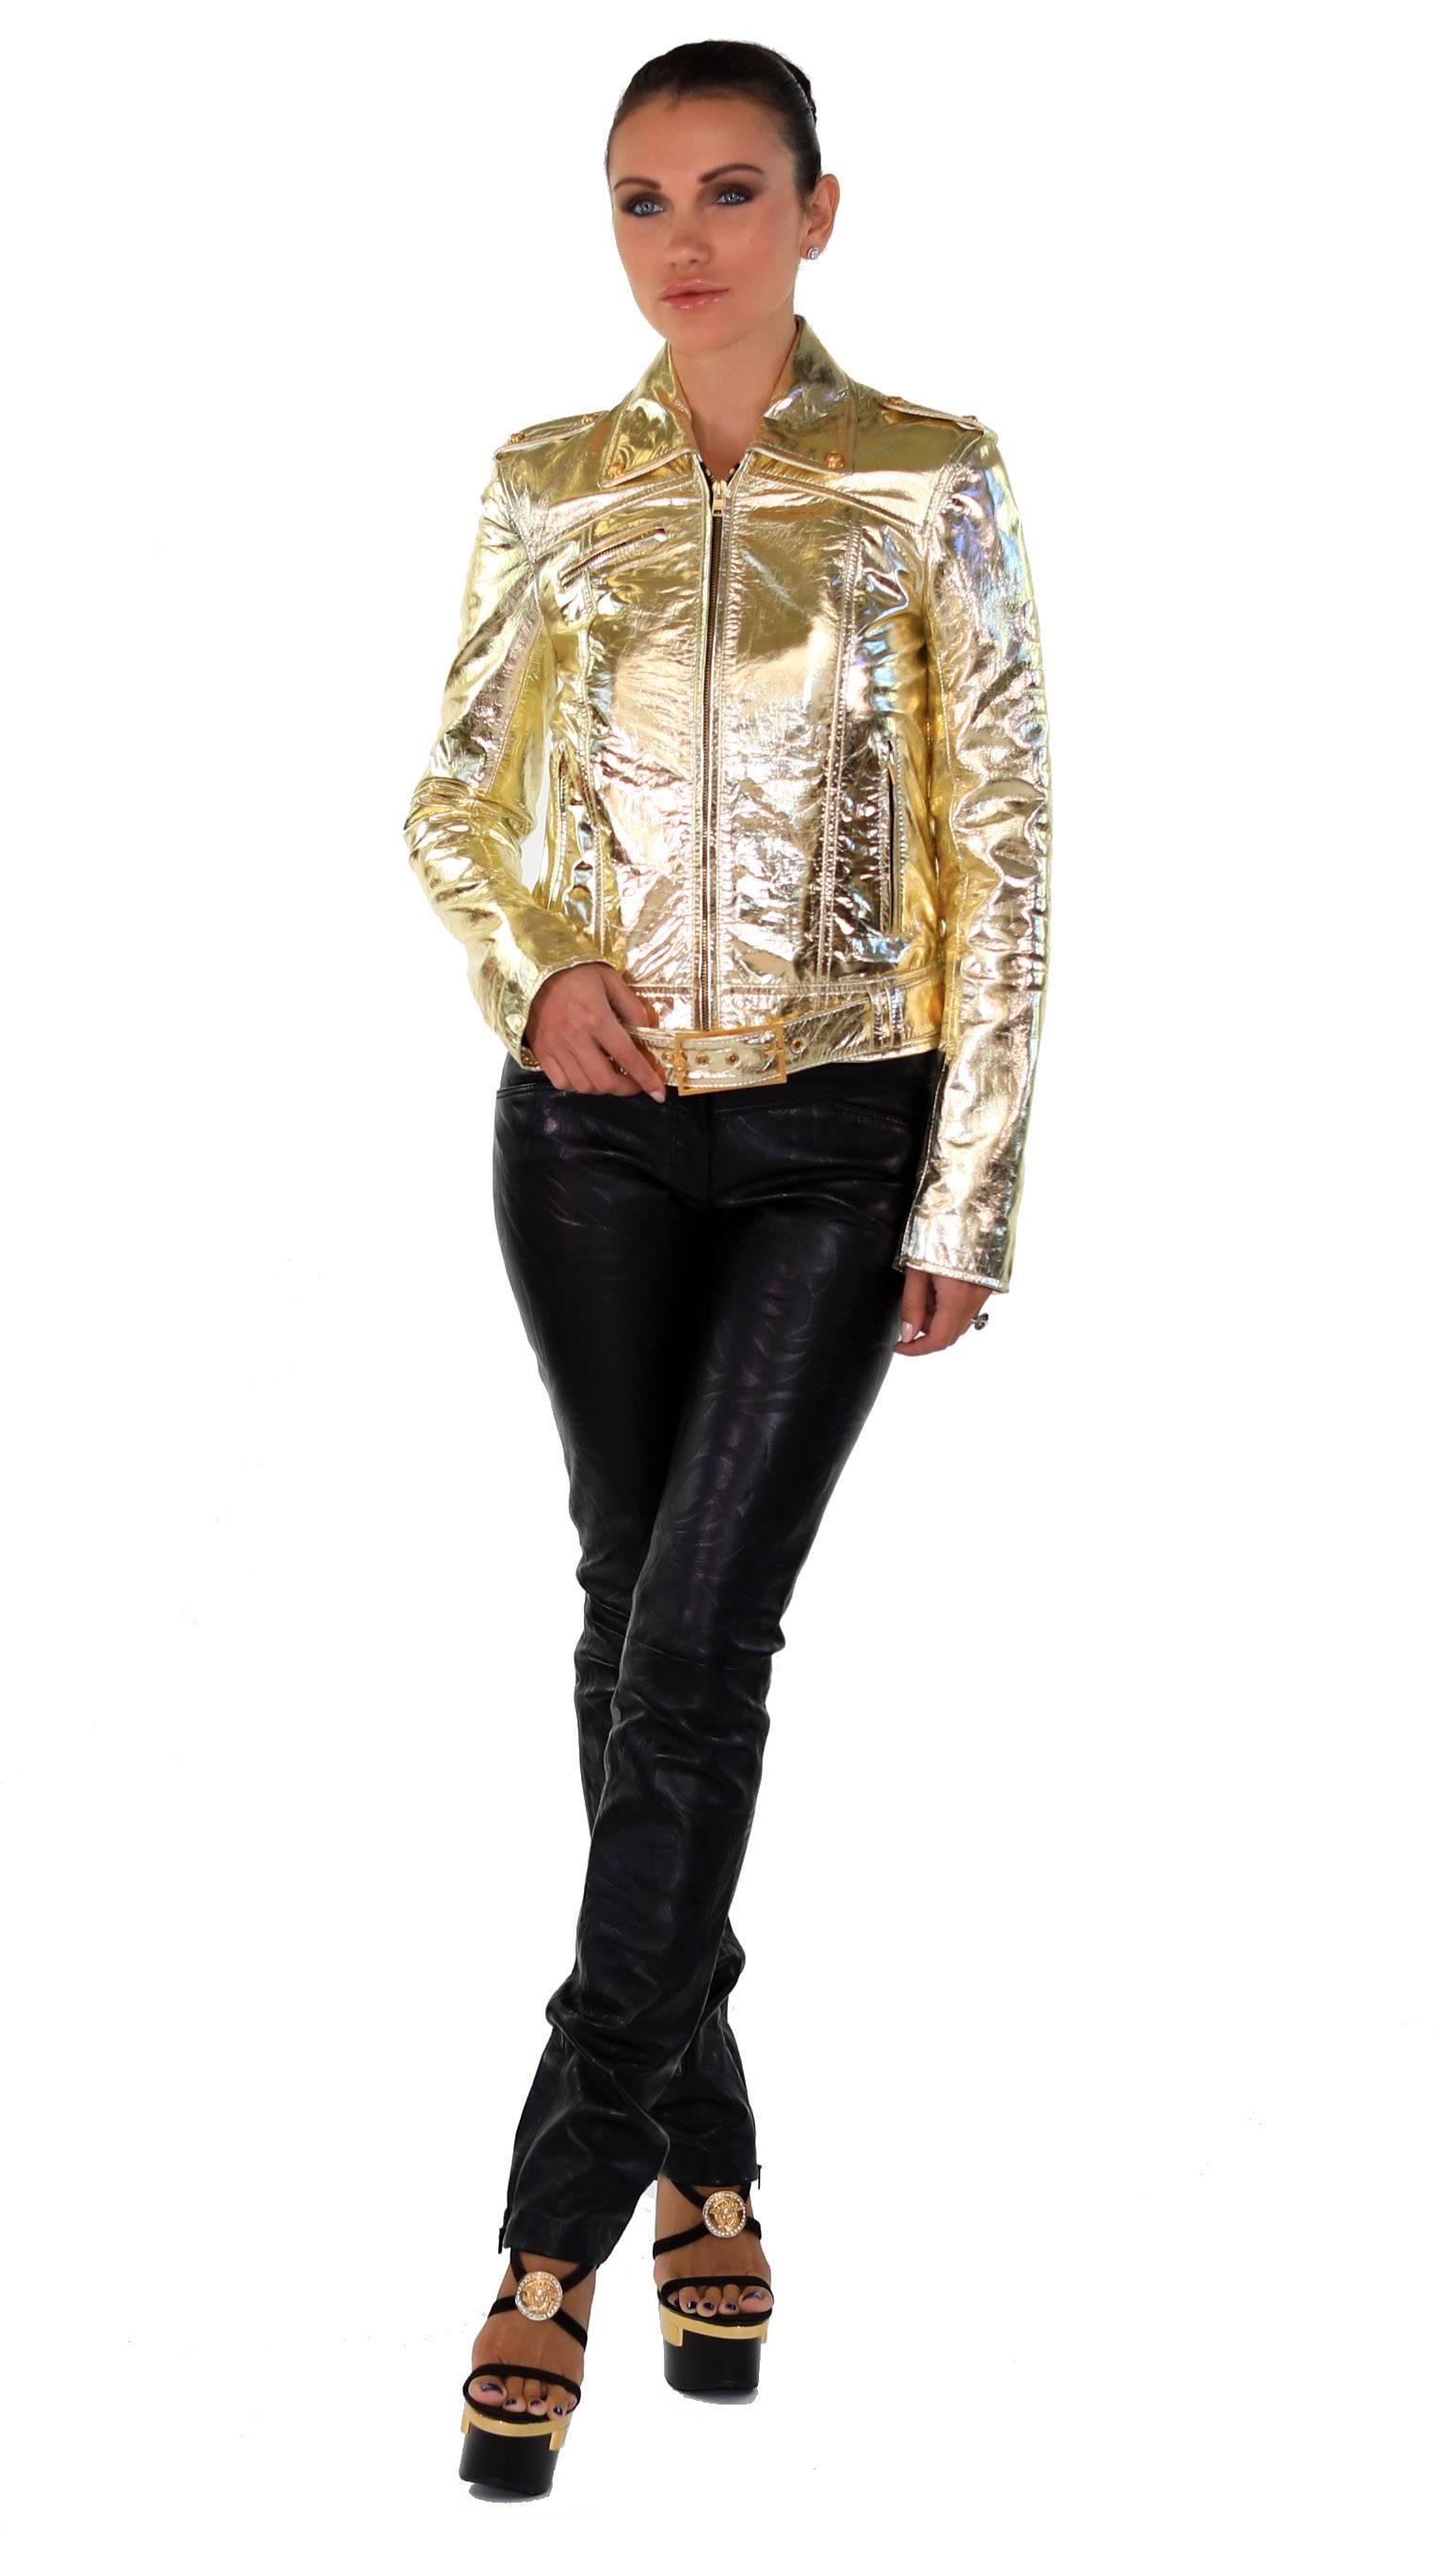 Gold VERSACE VERSUS GOLD METALLIC LEATHER BIKER JACKET with EMBROIDERY